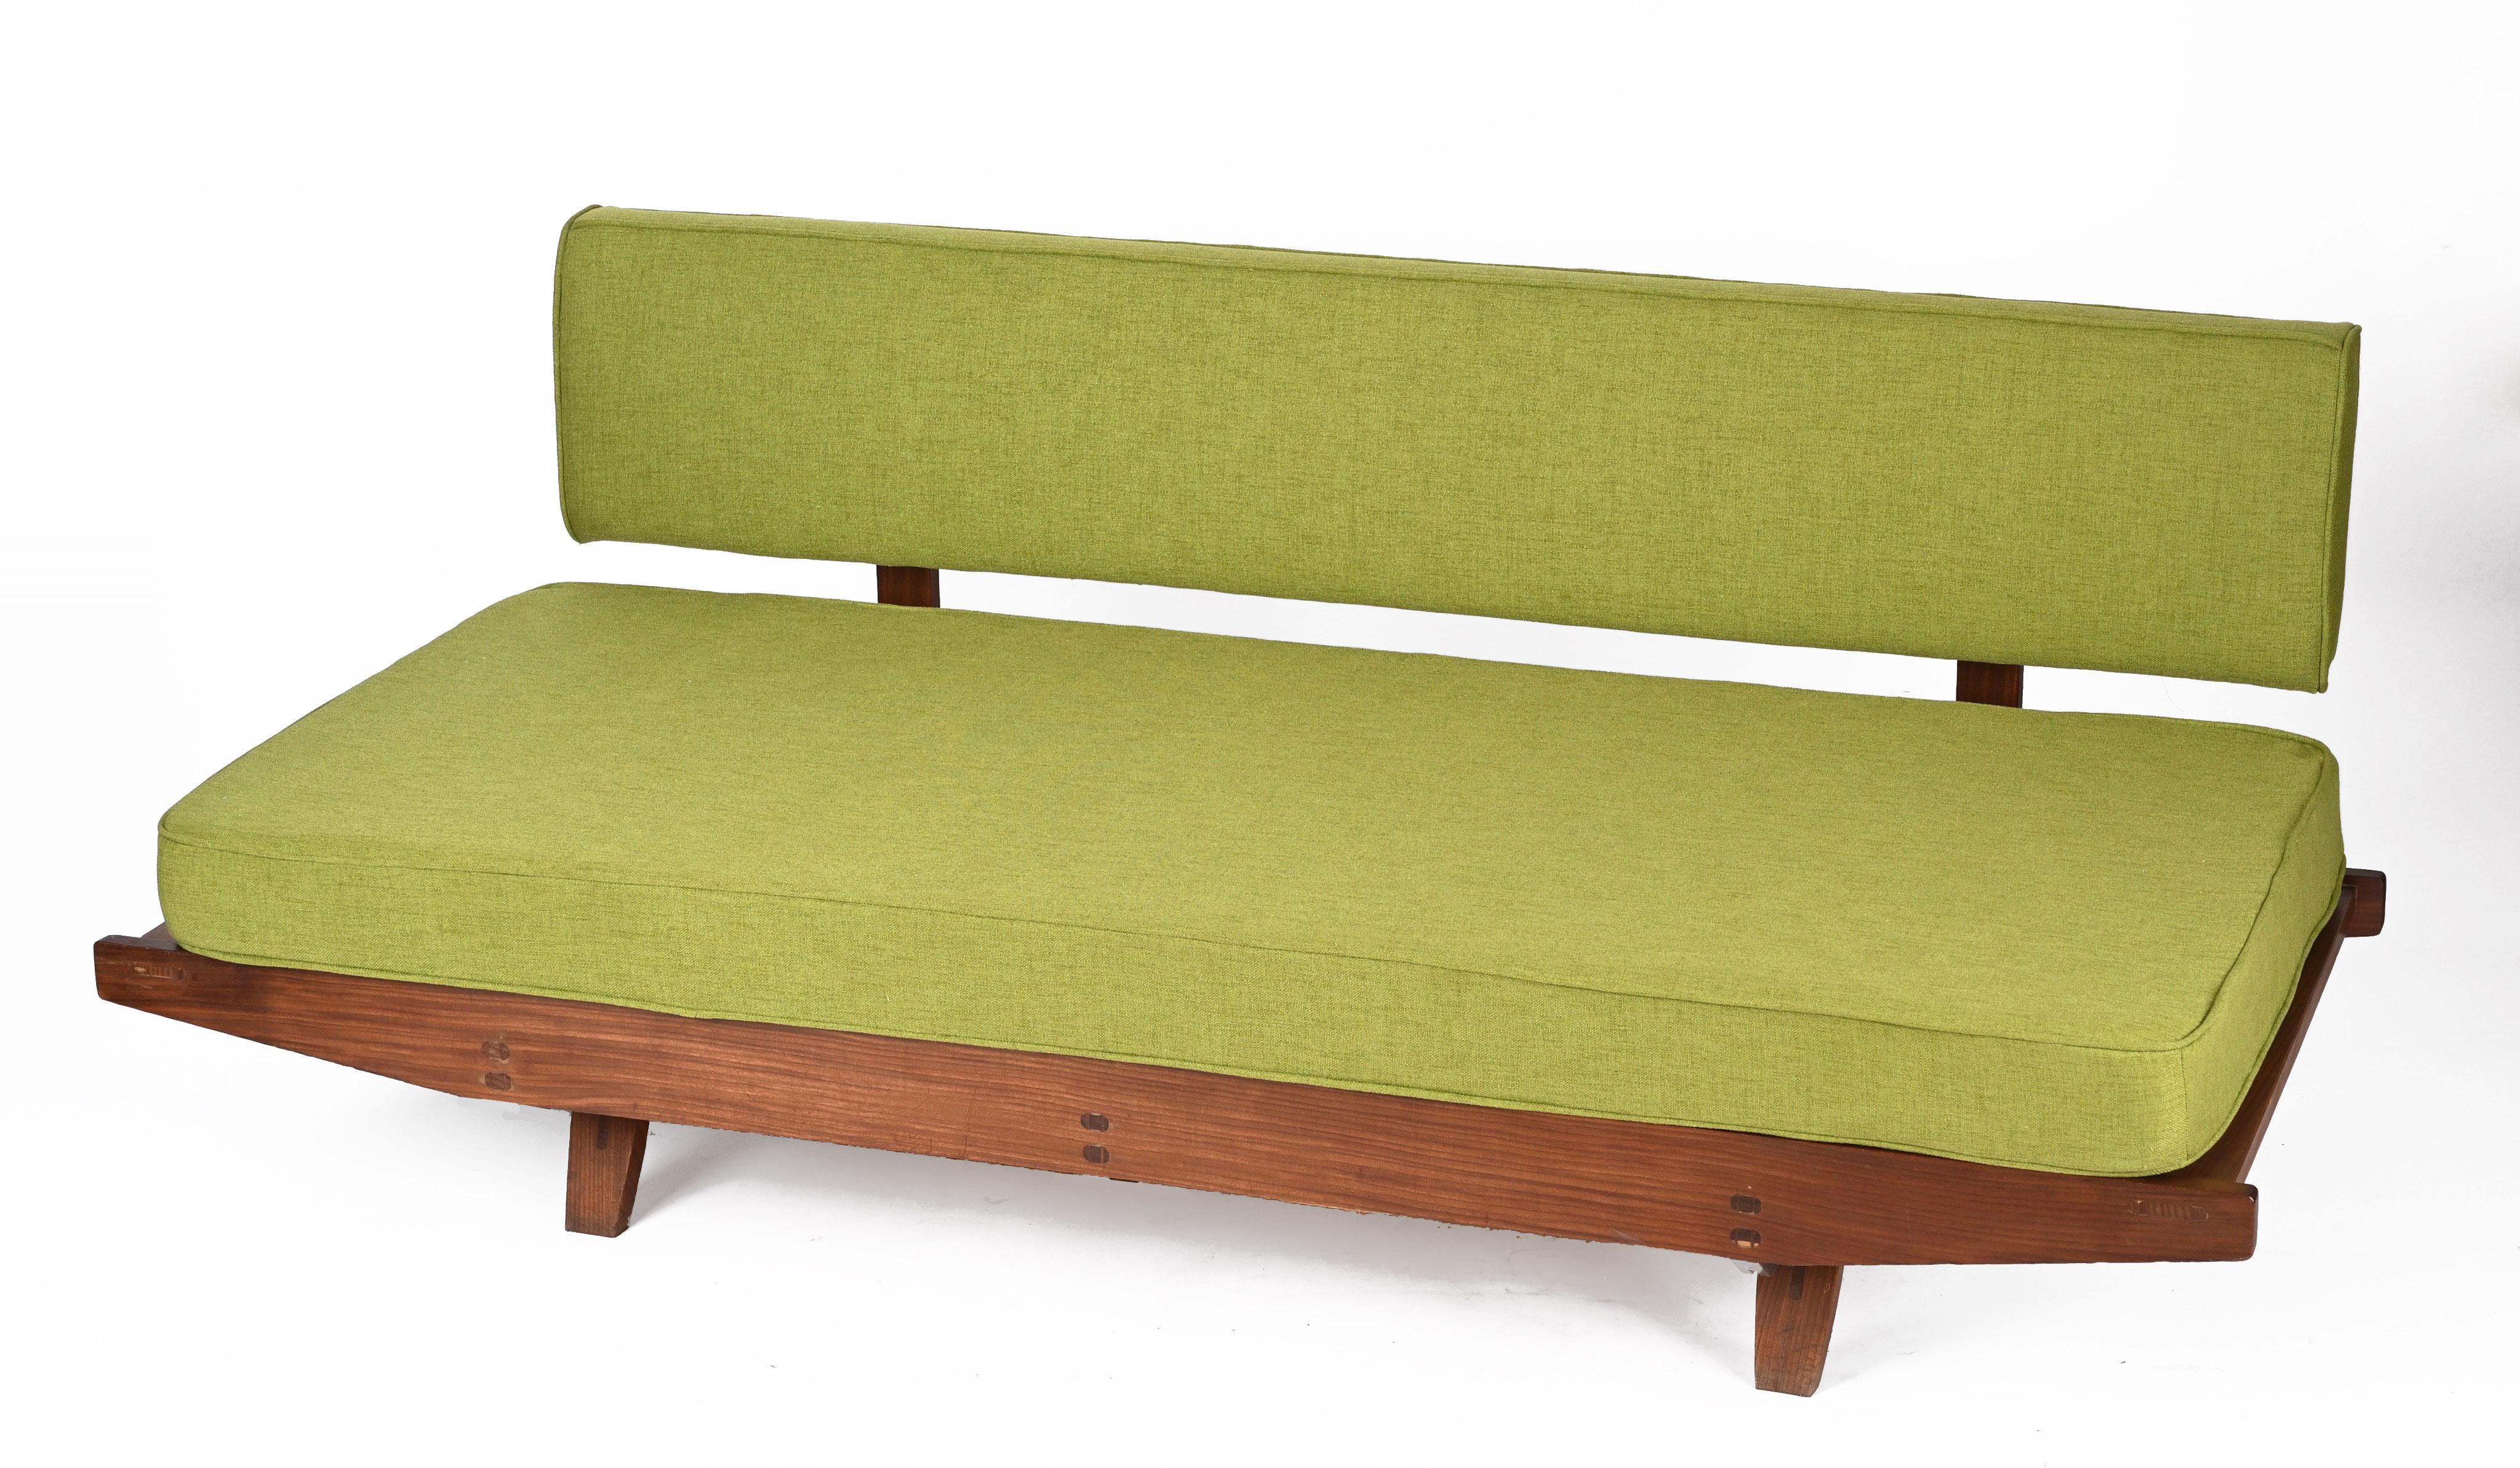 Fantastic midcentury teak and sage green fabric extendable sofa. This incredible piece was designed in Denmark after Hans Olsen during the 1960s.

This item has a magnificent teak wood structure, with an extendable seat with completely restored